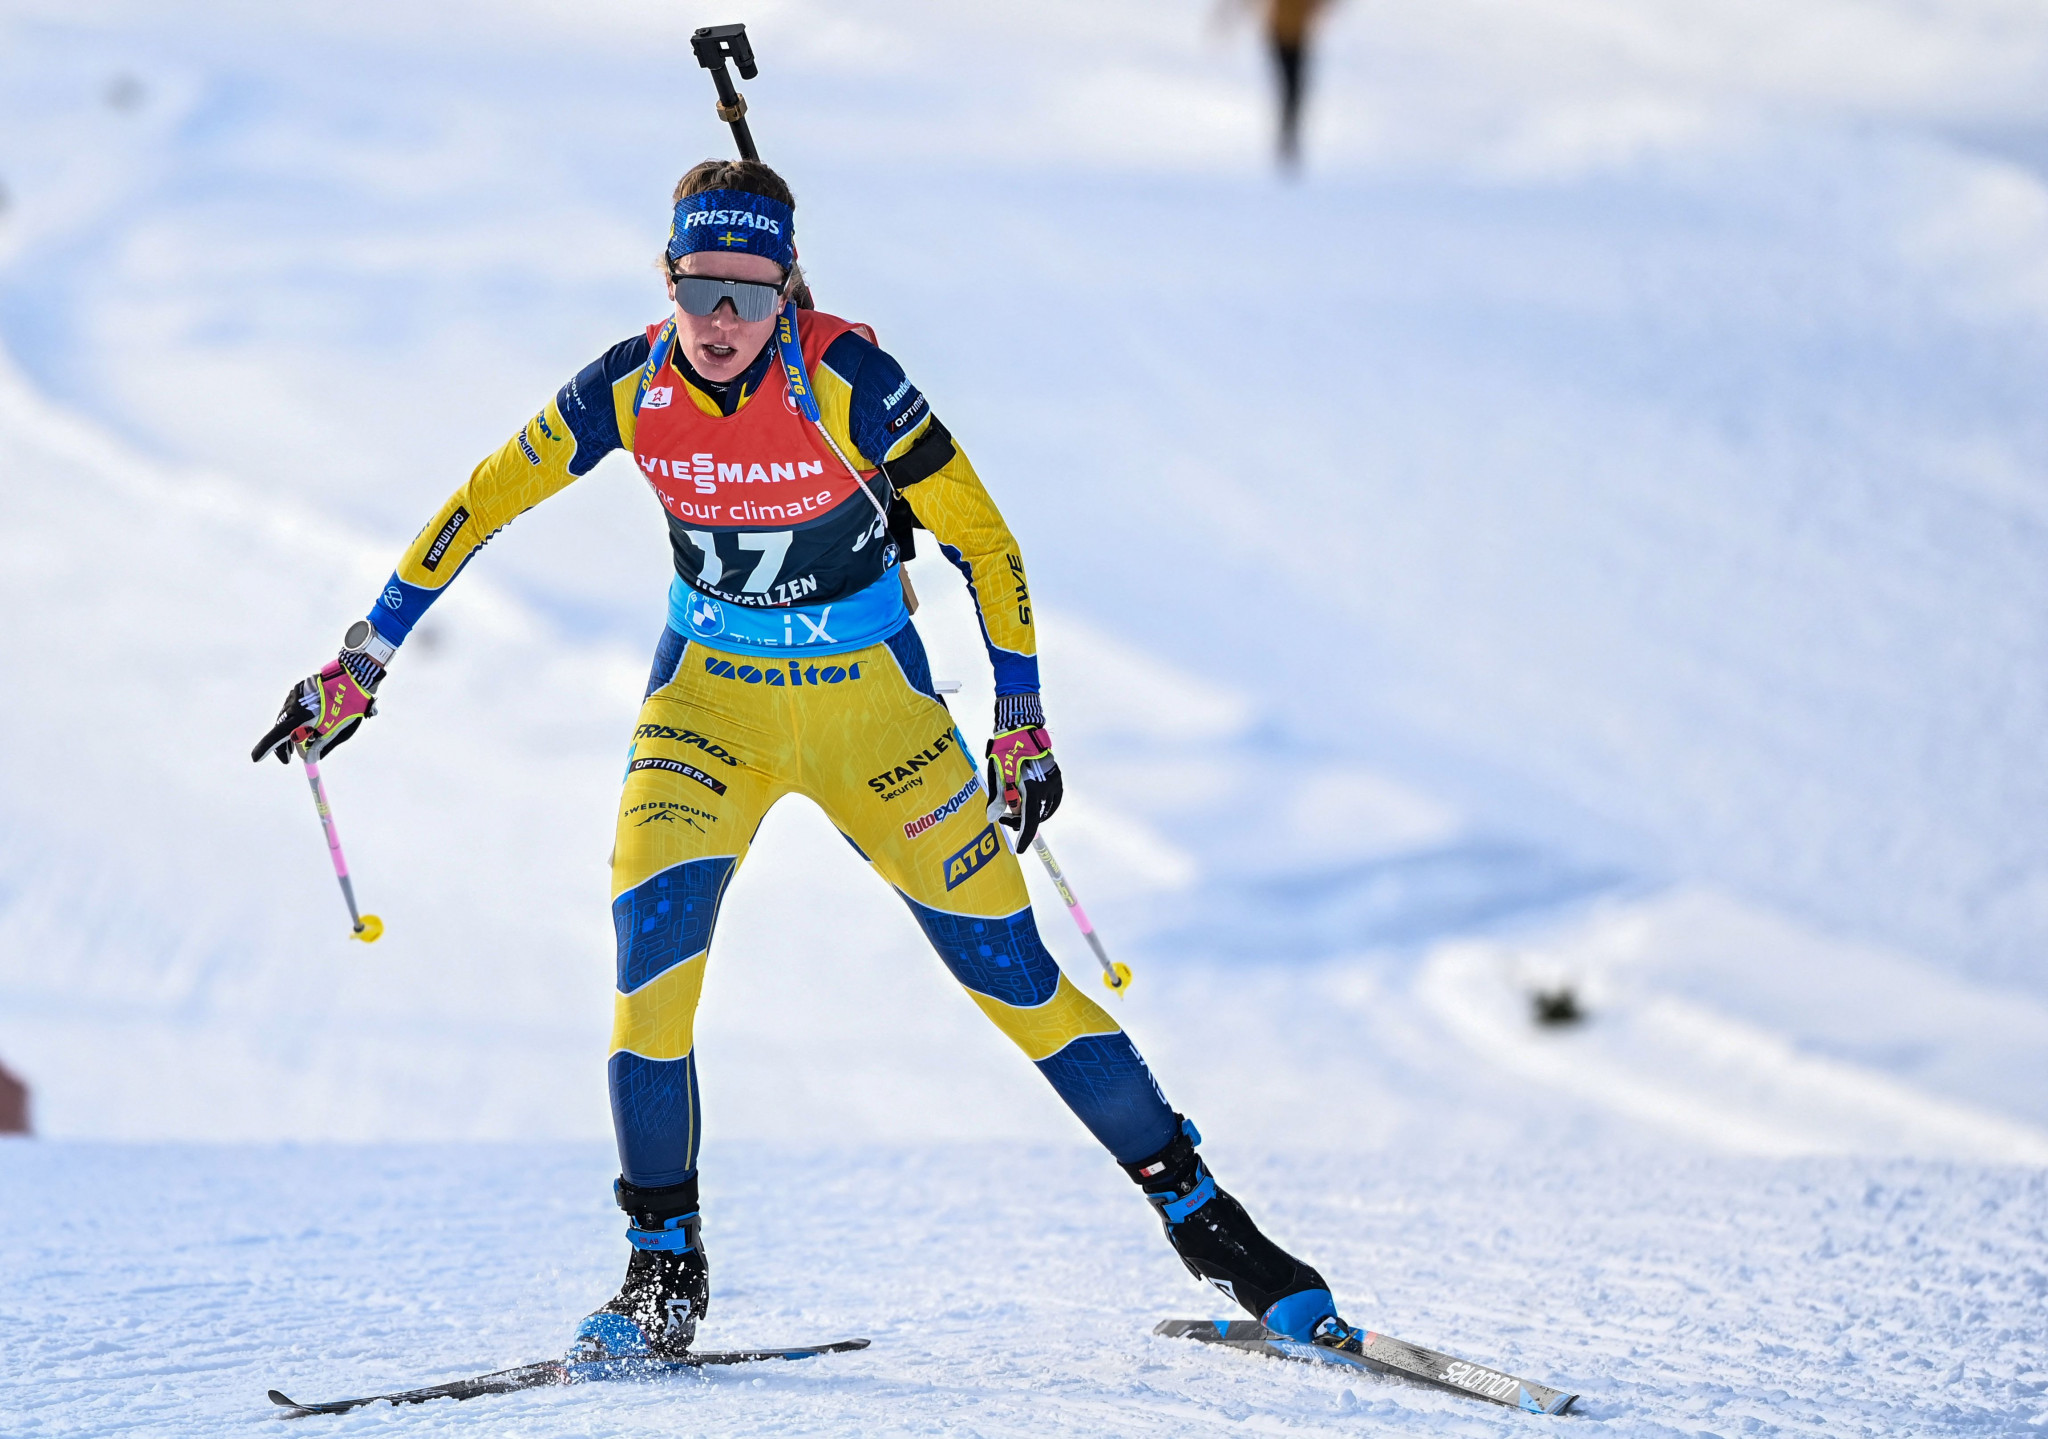 Öberg wins second gold in two days in mass start at Annecy Biathlon World Cup